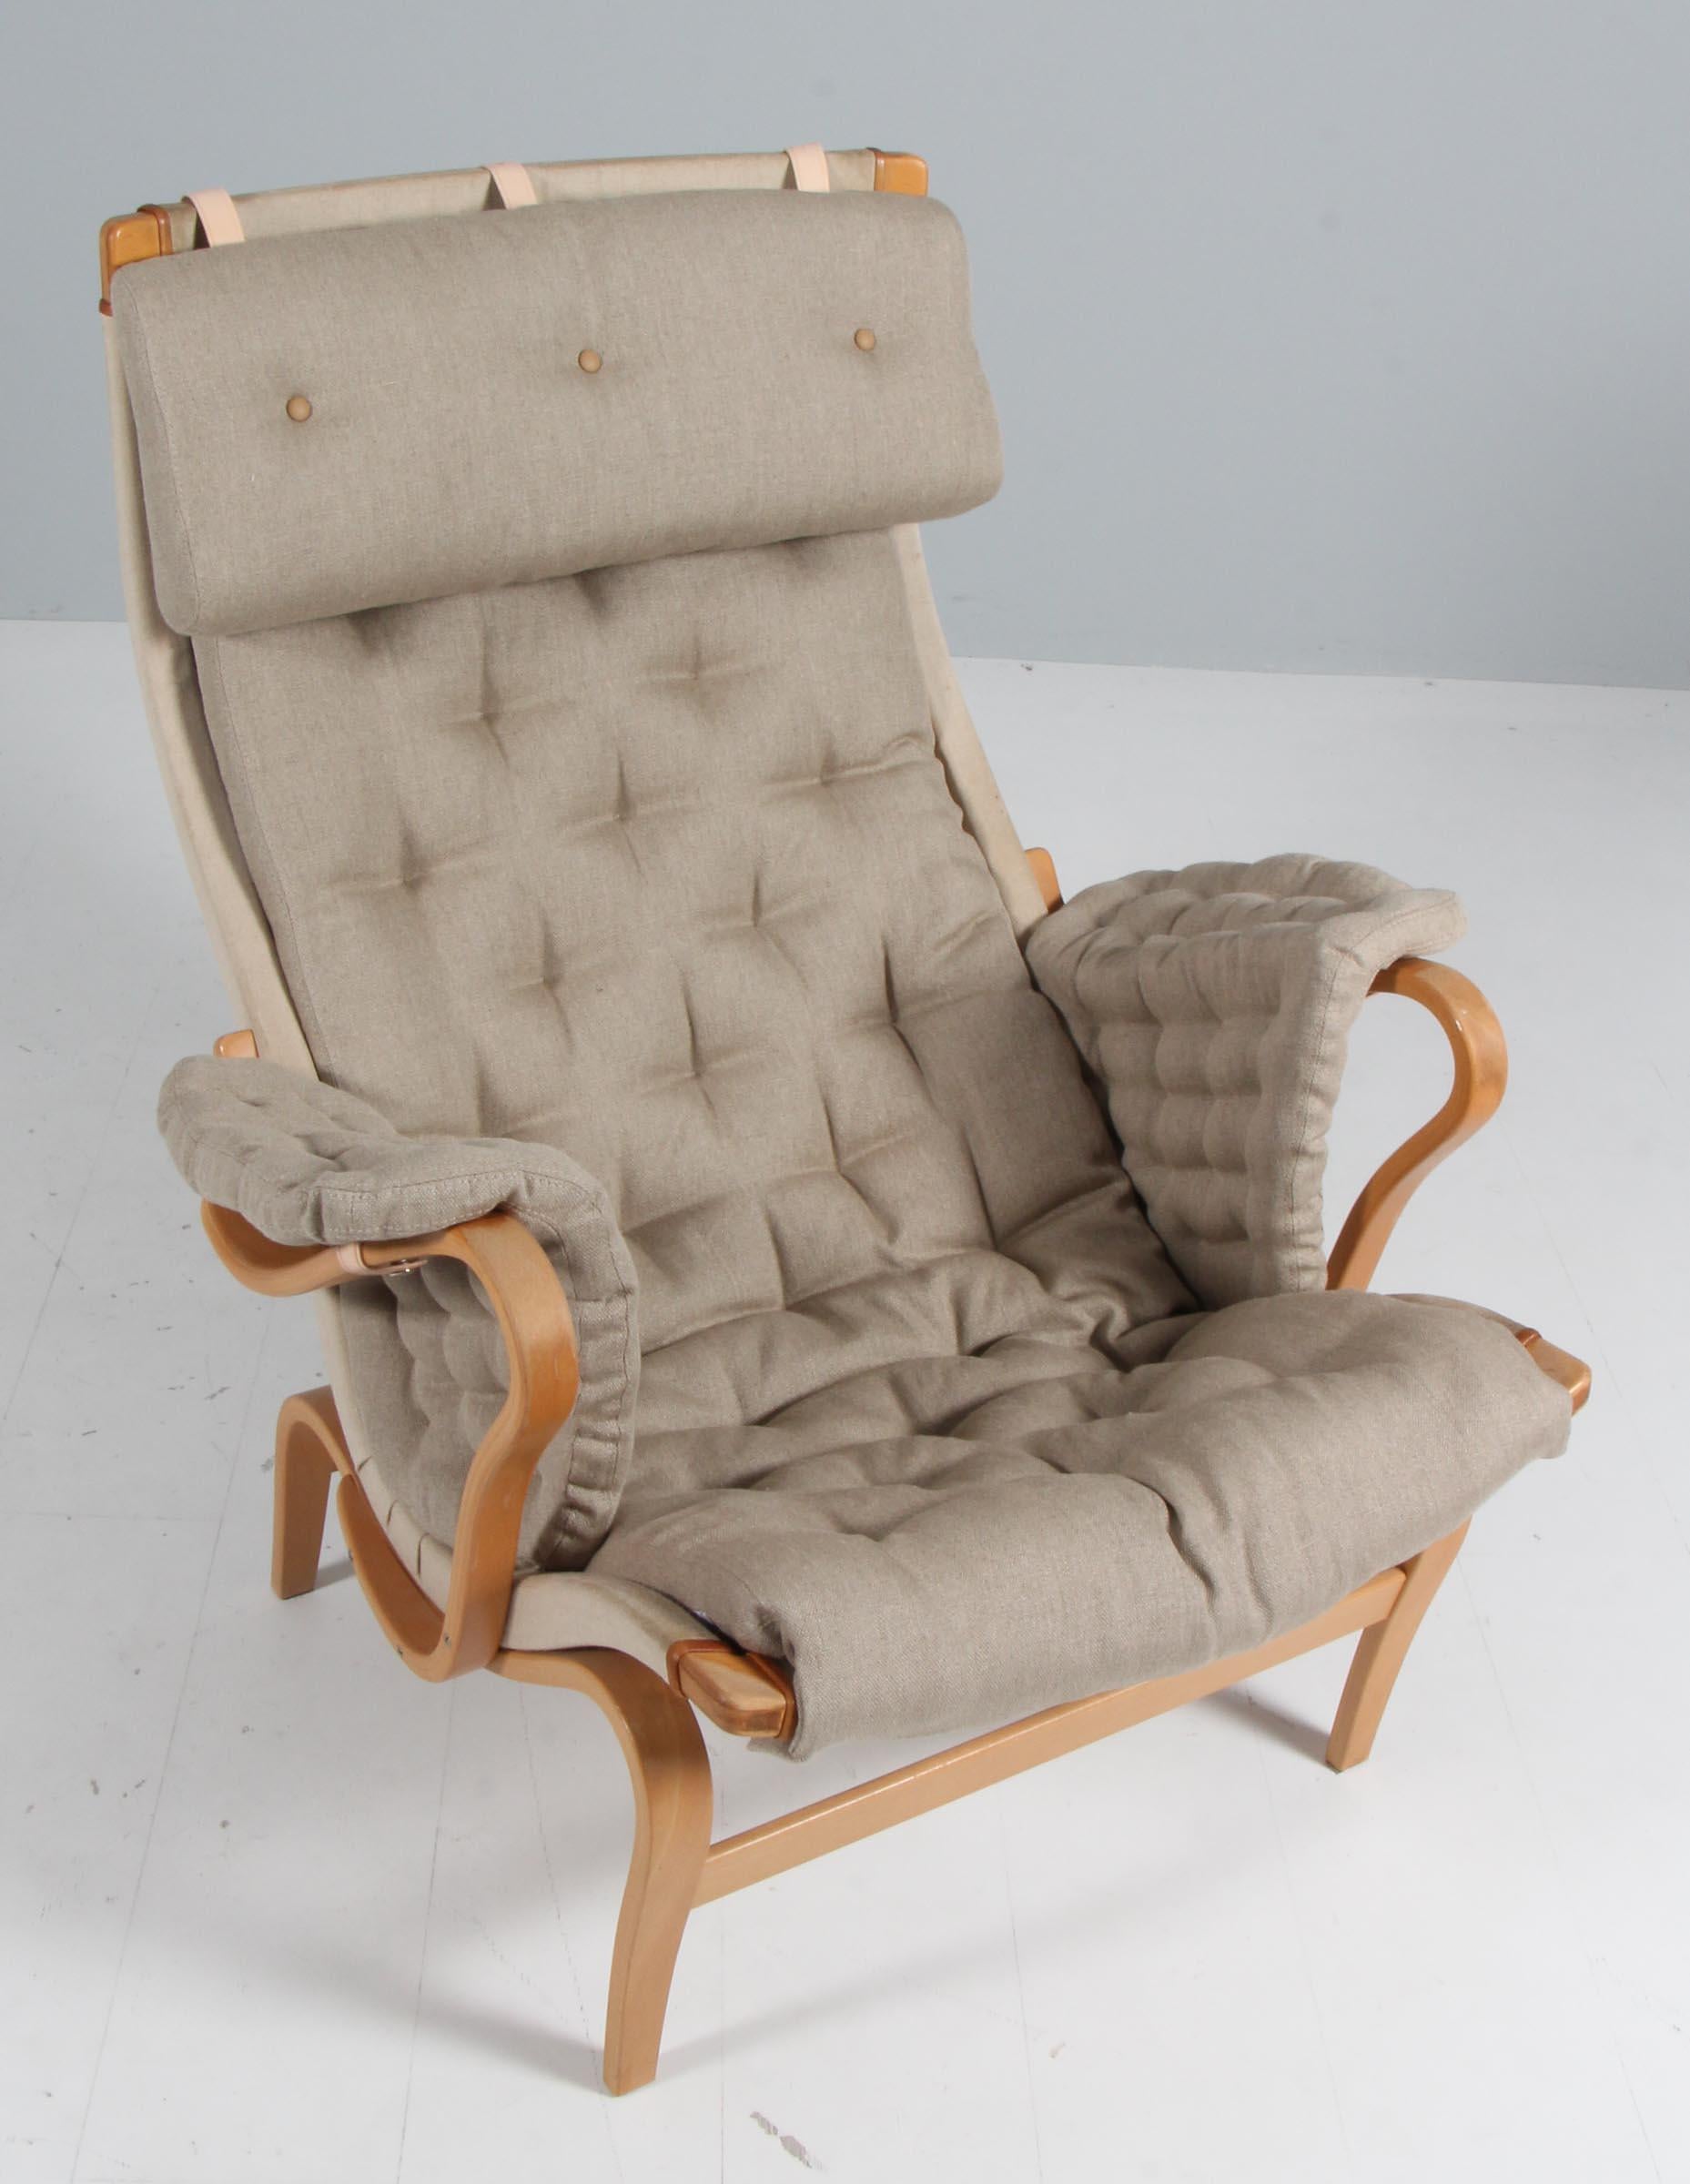 Bruno Mathsson Pernilla lounge chair with new canvas cushions

Frame in beech.

Made by DUX.